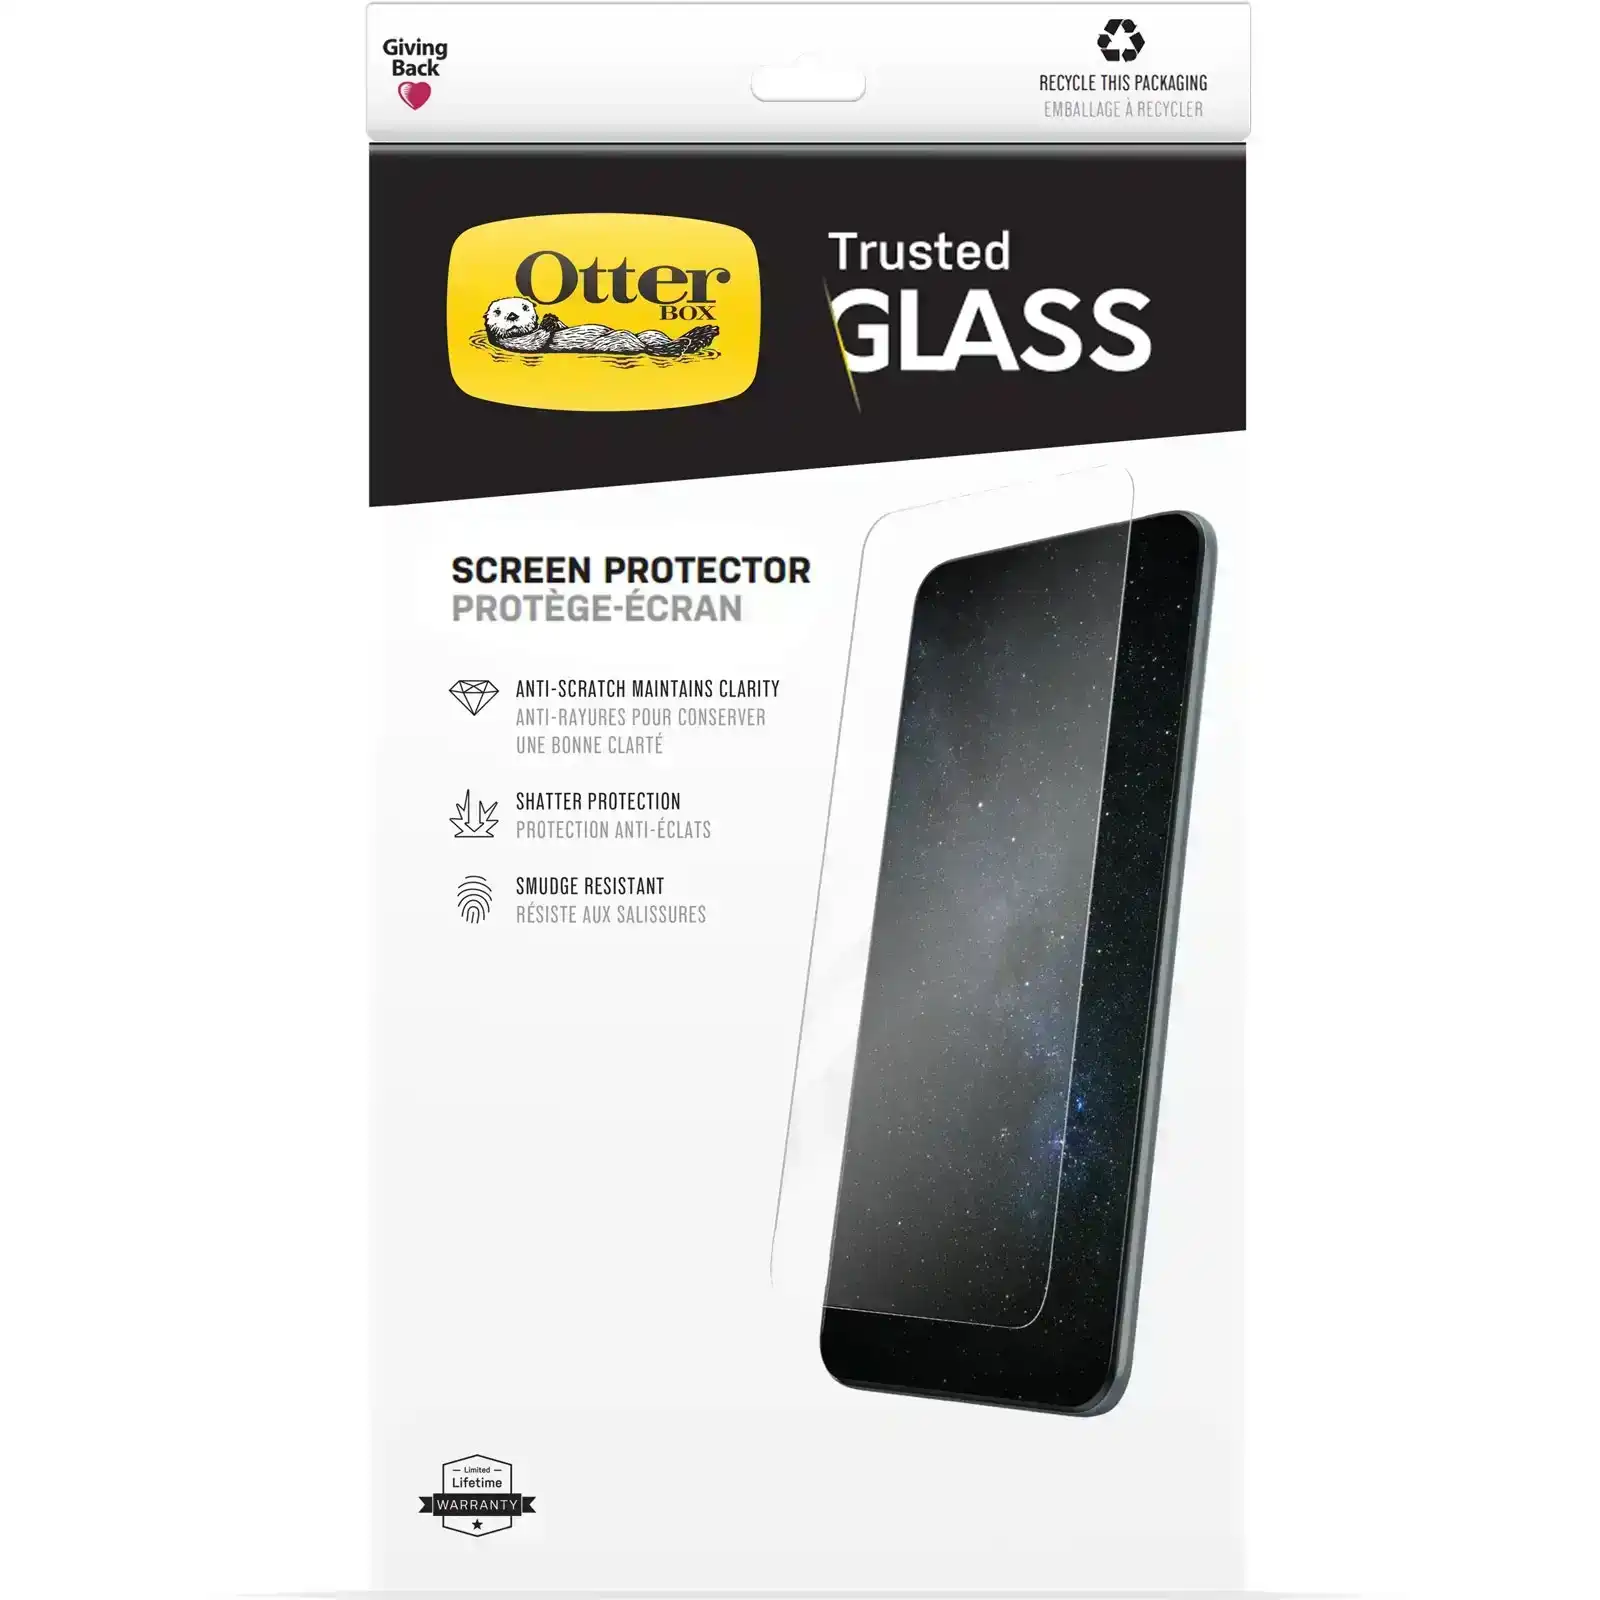 Otterbox Trusted Glass Screen Protector For Apple iPhone 14 Plus